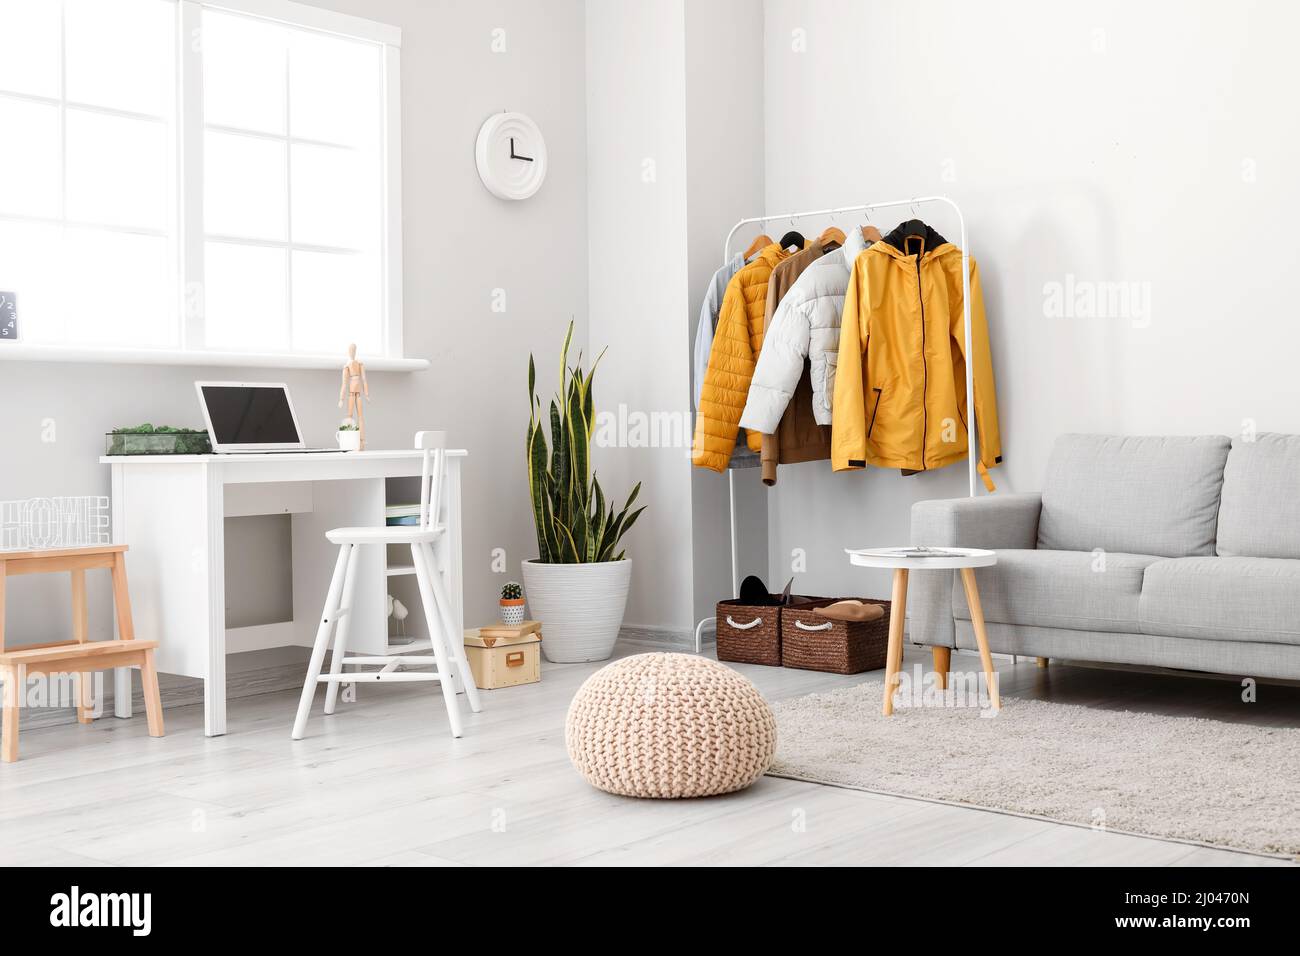 Interior of light room with modern workplace and warm jackets Stock Photo